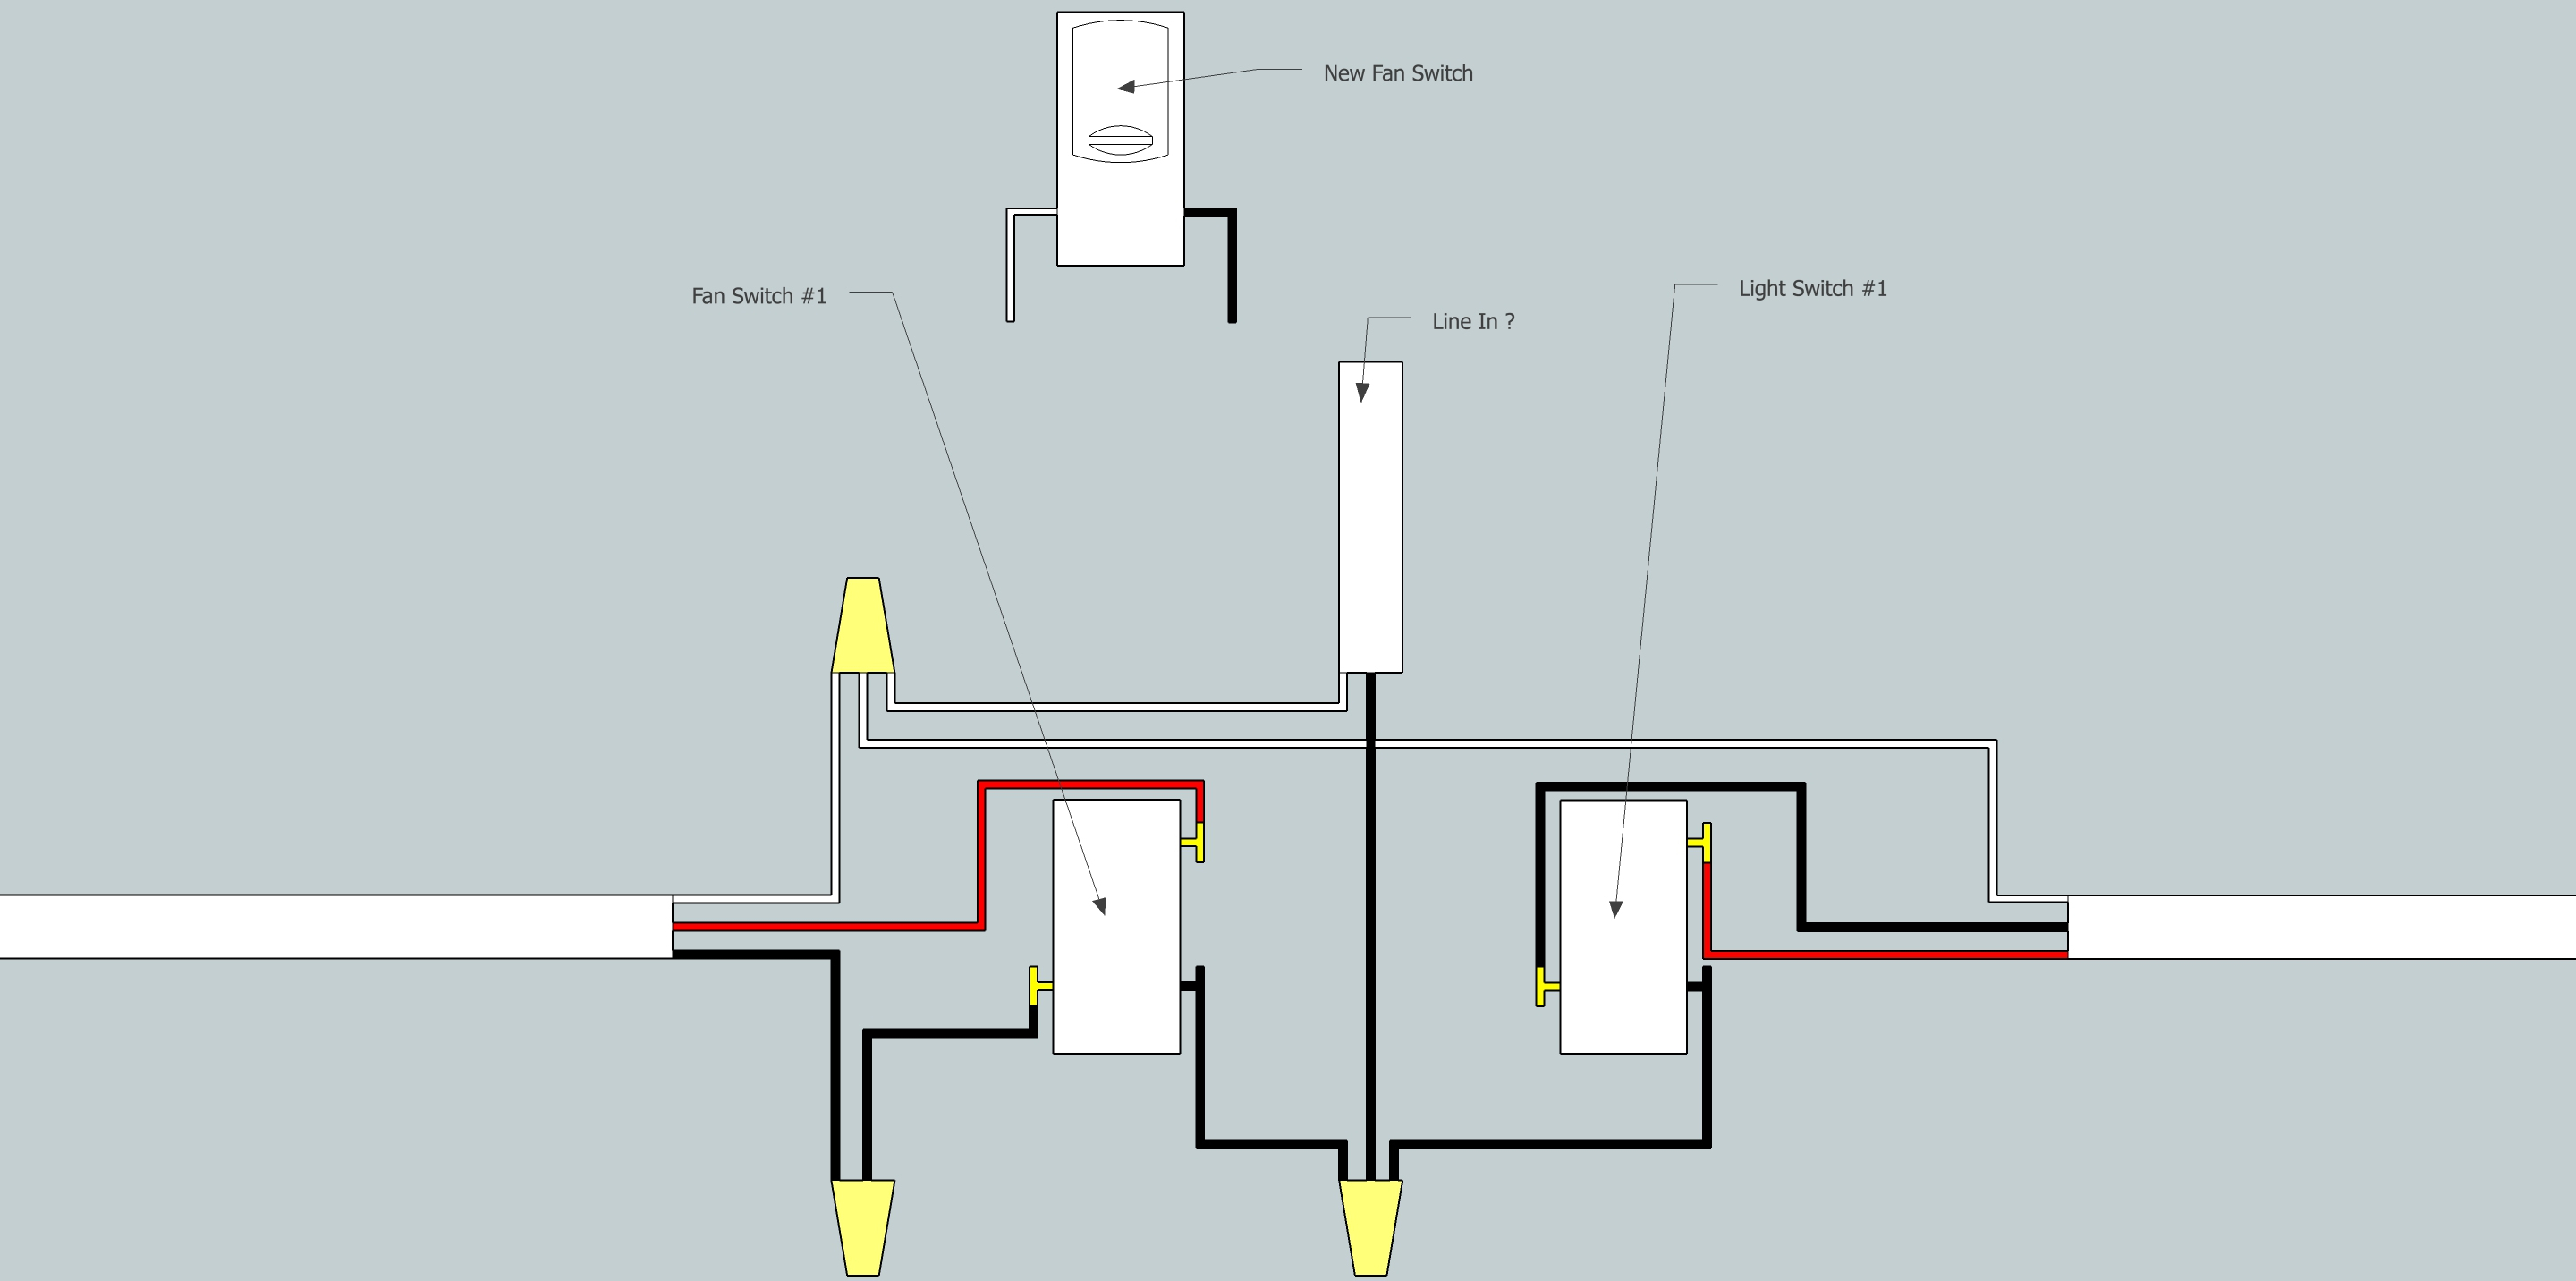 Electrical - Need Help Adding Fan To Existing 3-Way Switch Setup - 3 Way Switching Wiring Diagram